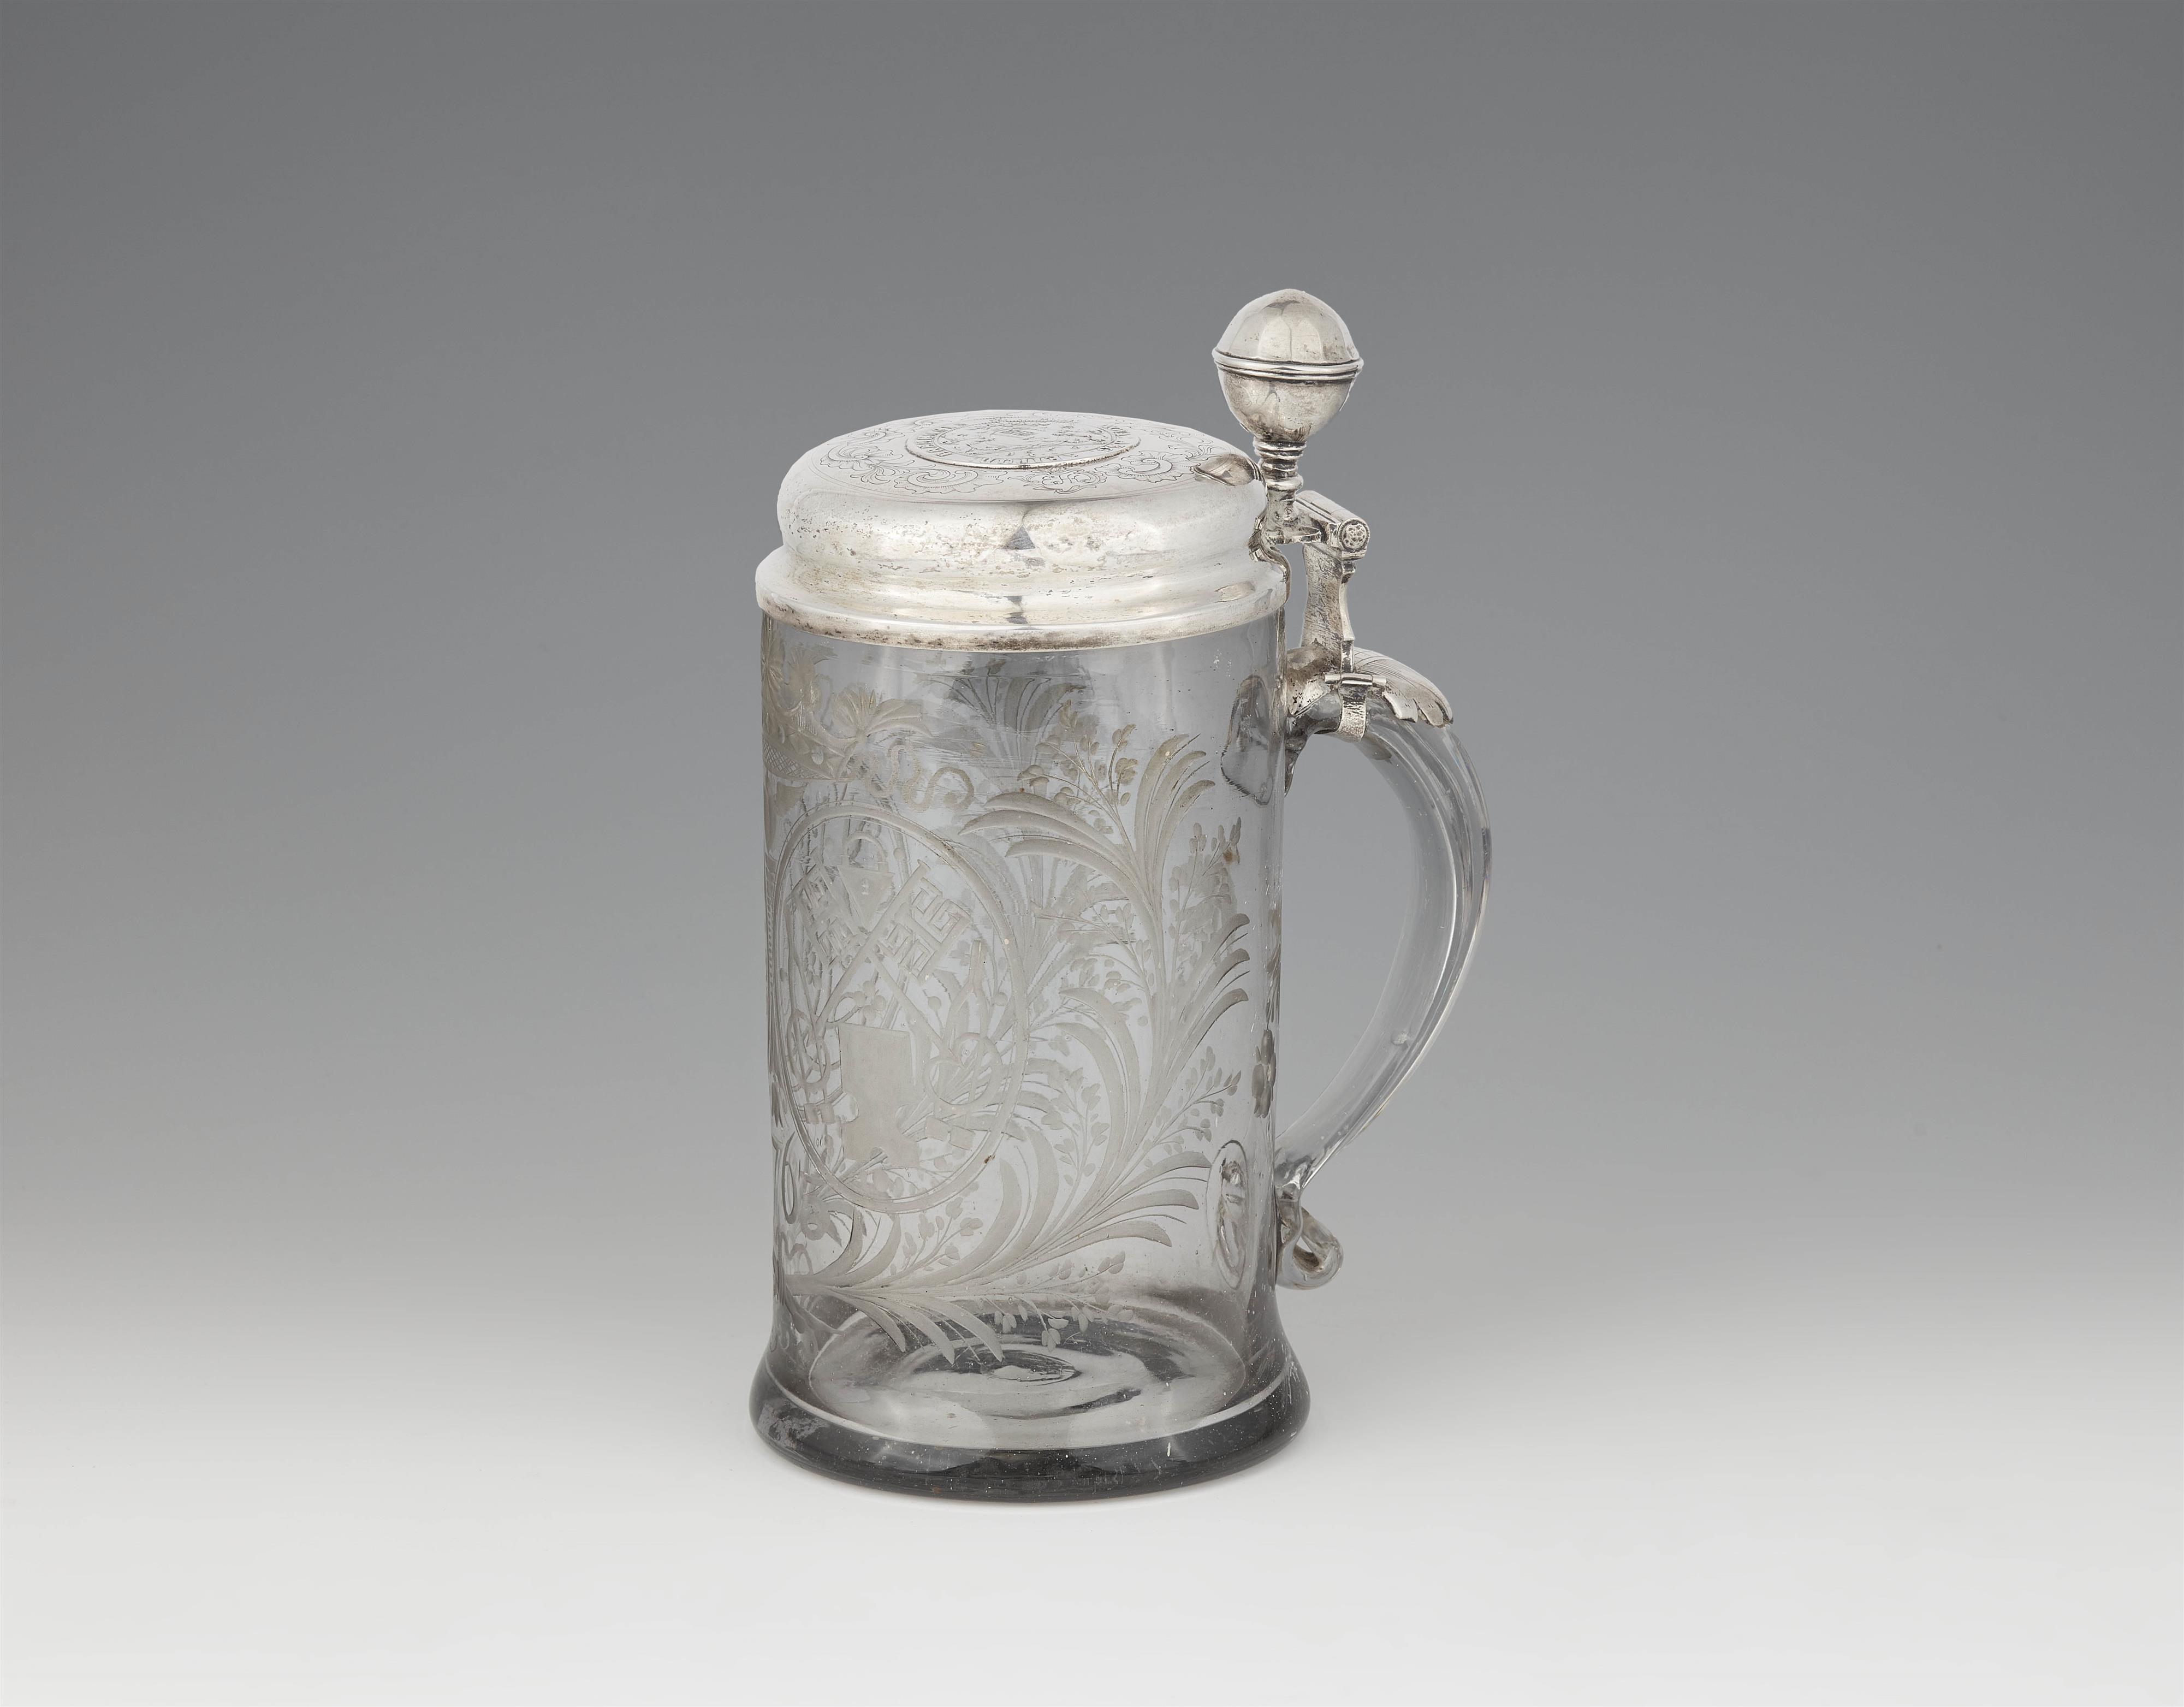 A Bremen silver-mounted glass tankard made for a locksmith's guild - image-1